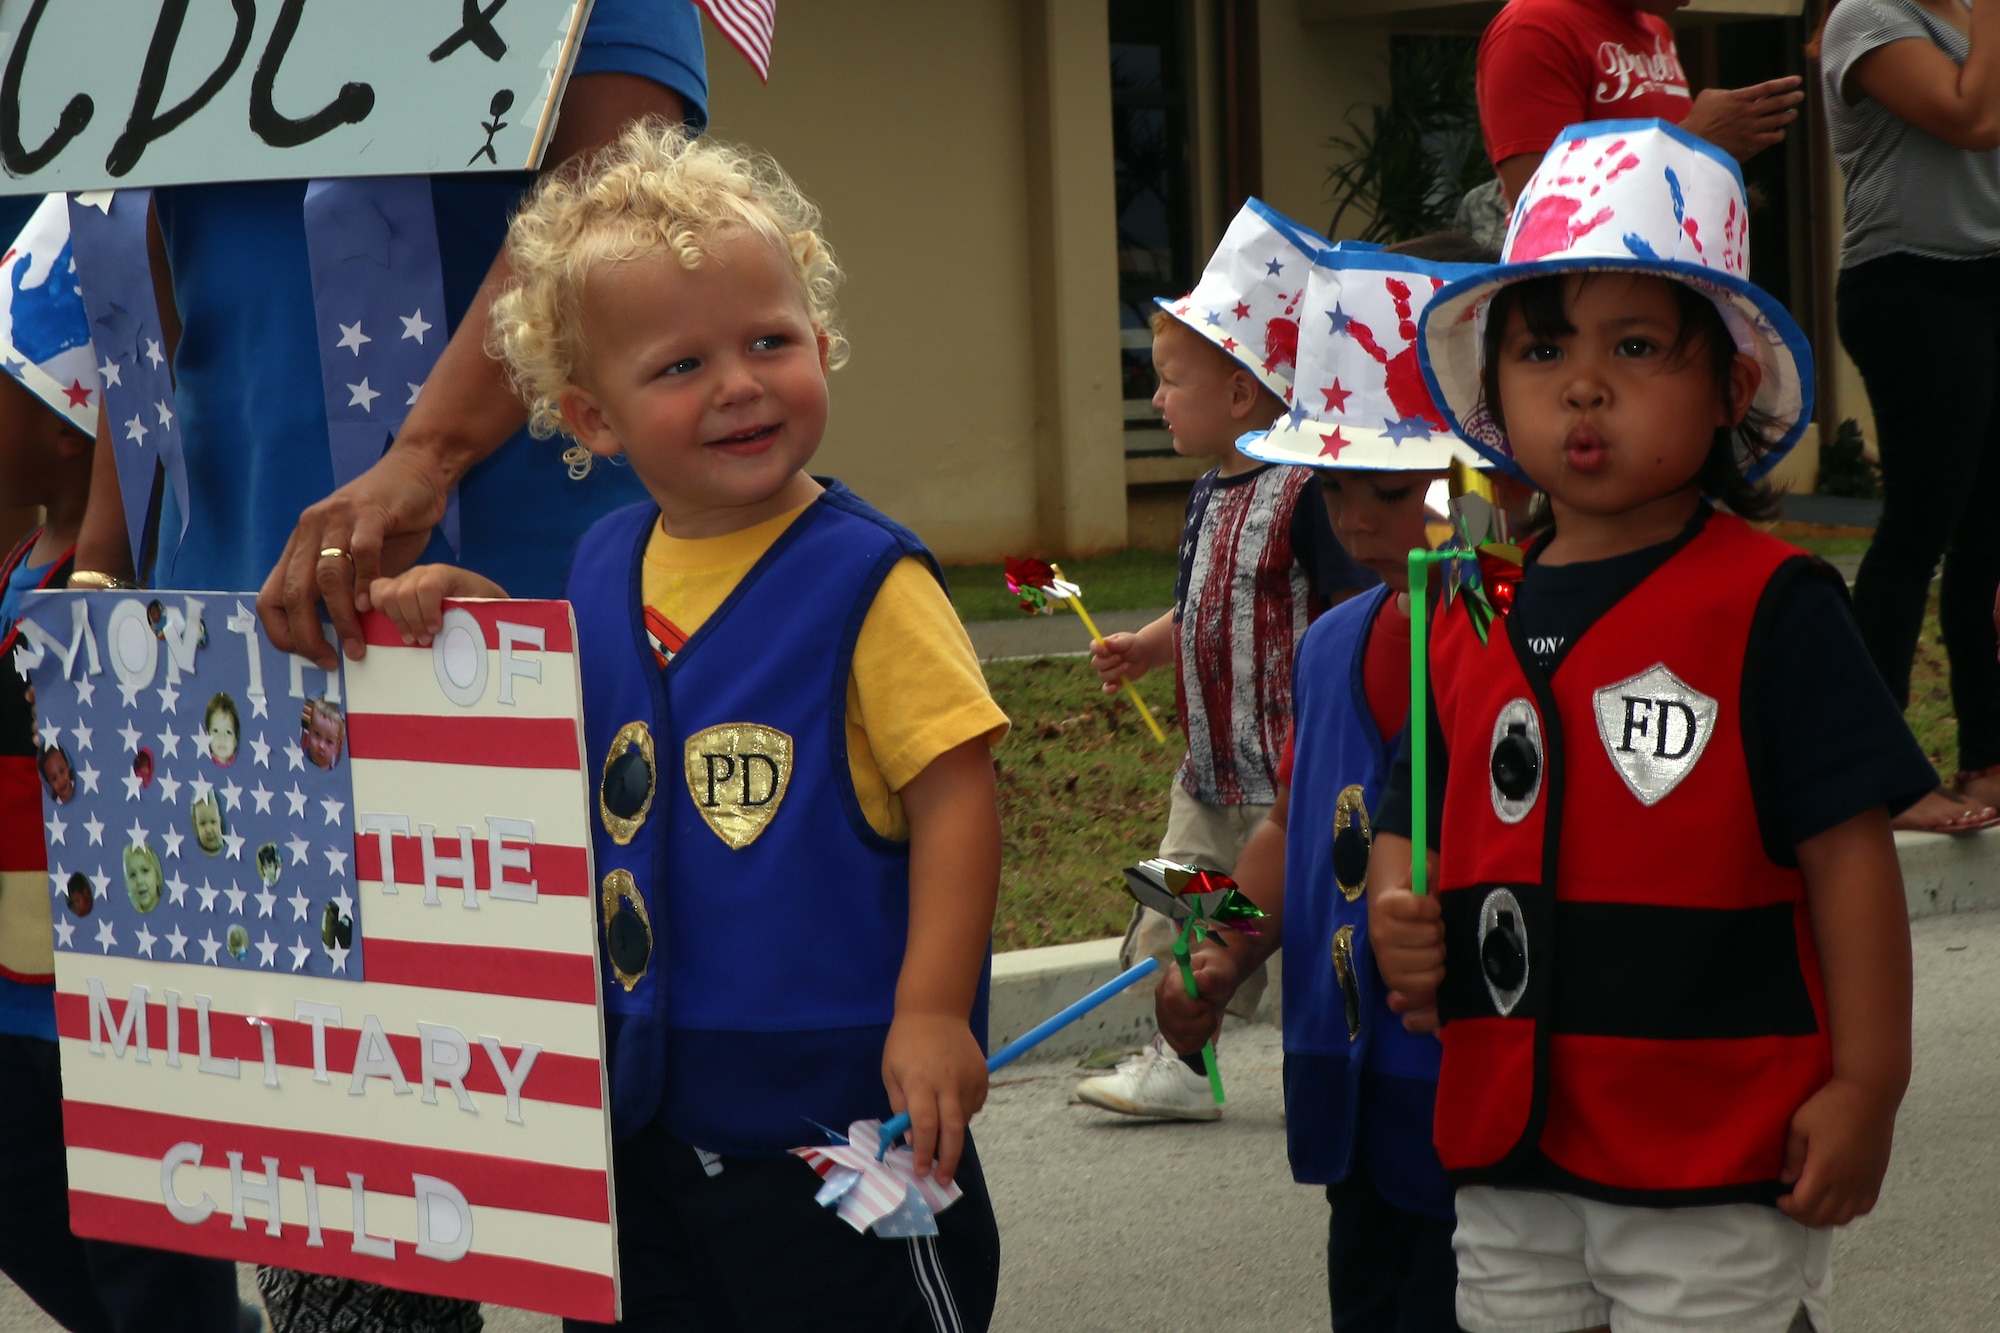 Andersen Child Development Center children participate in a parade April 10, 2015, at Andersen Air Force Base, Guam, to celebrate the Month of the Military Child. April was designated as the Month of the Military Child in 1986 to recognize sacrifices and contributions of children in the armed forces community. (U.S. Air Force photo by Staff Sgt. Melissa B. White/Released)
